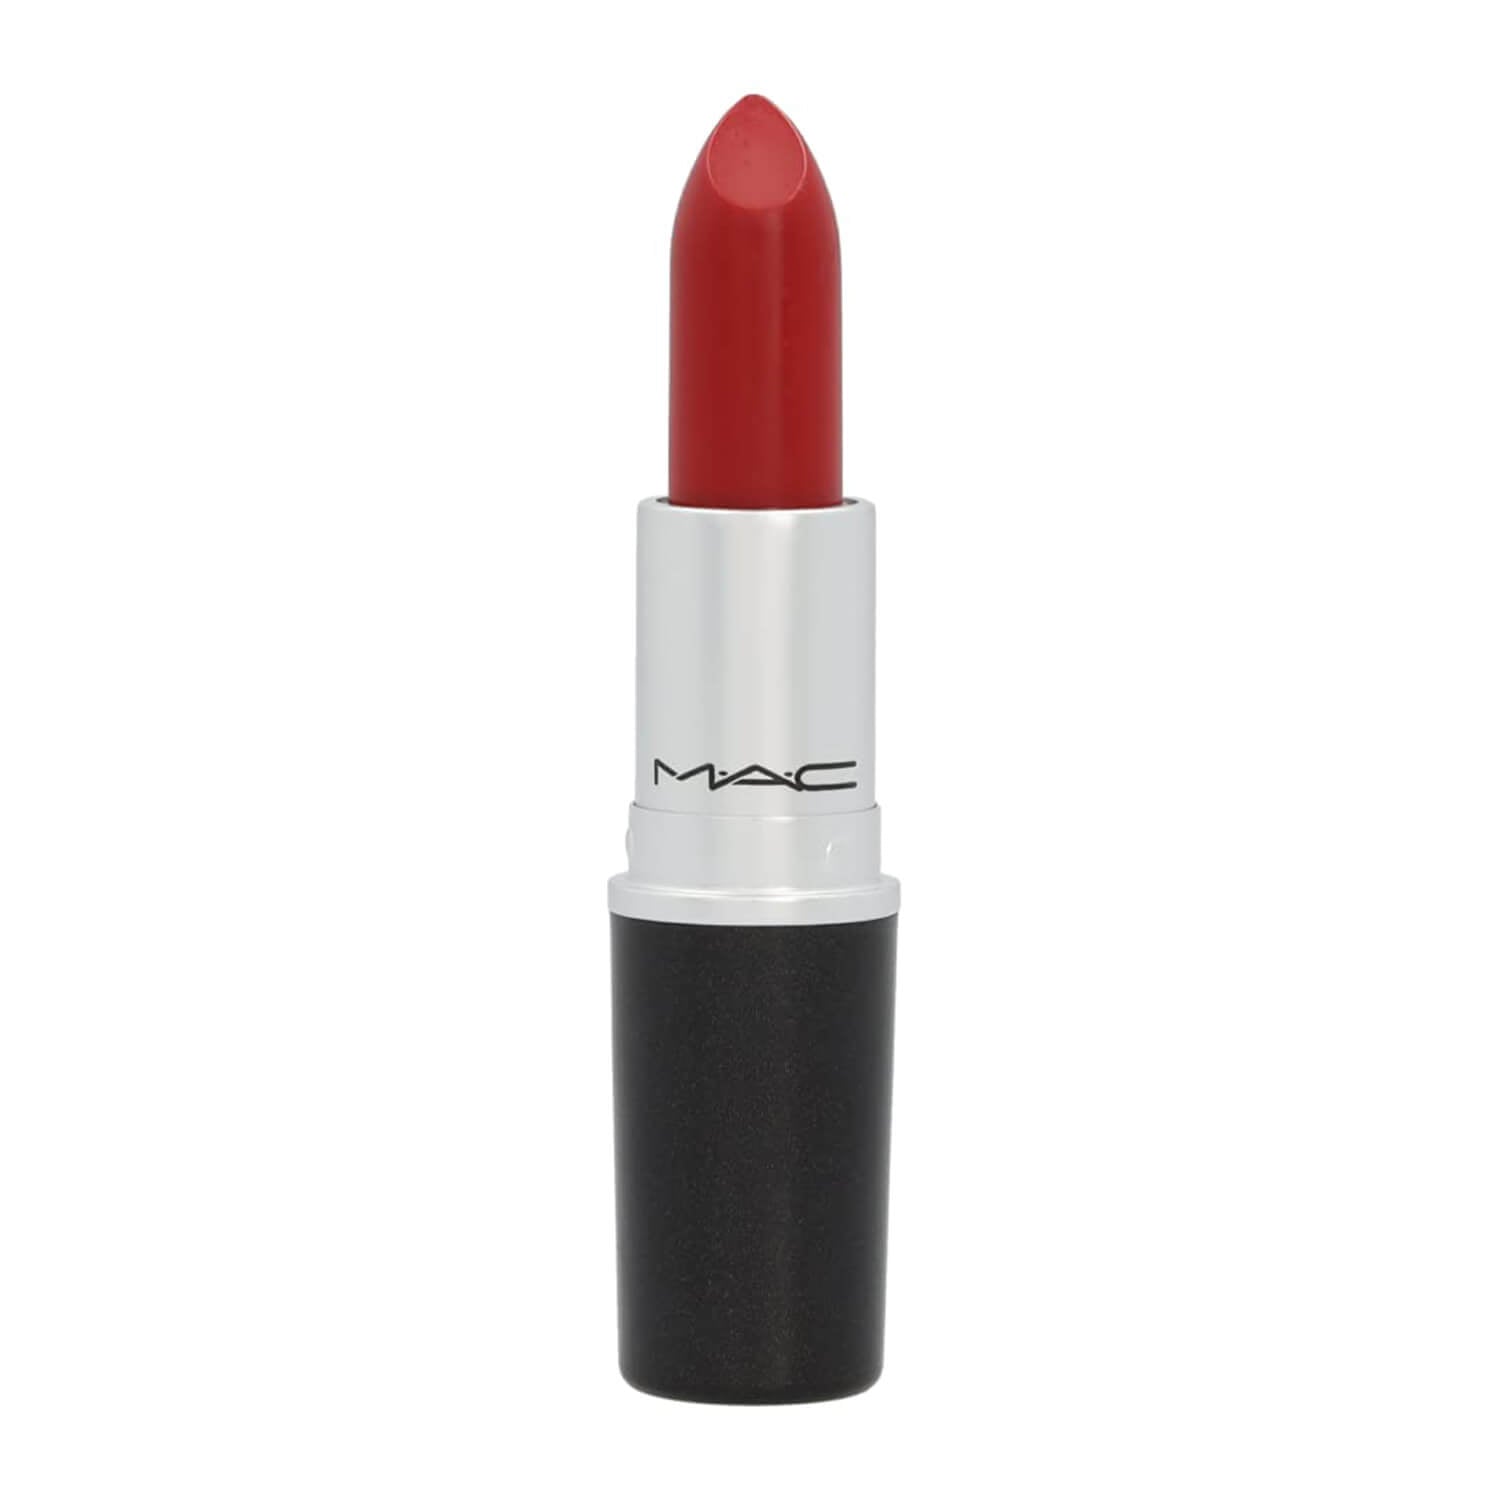 Shop MAC Lustre Lipstick for her in Lady Bug available at Heygirl.pk for delivery in Pakistan